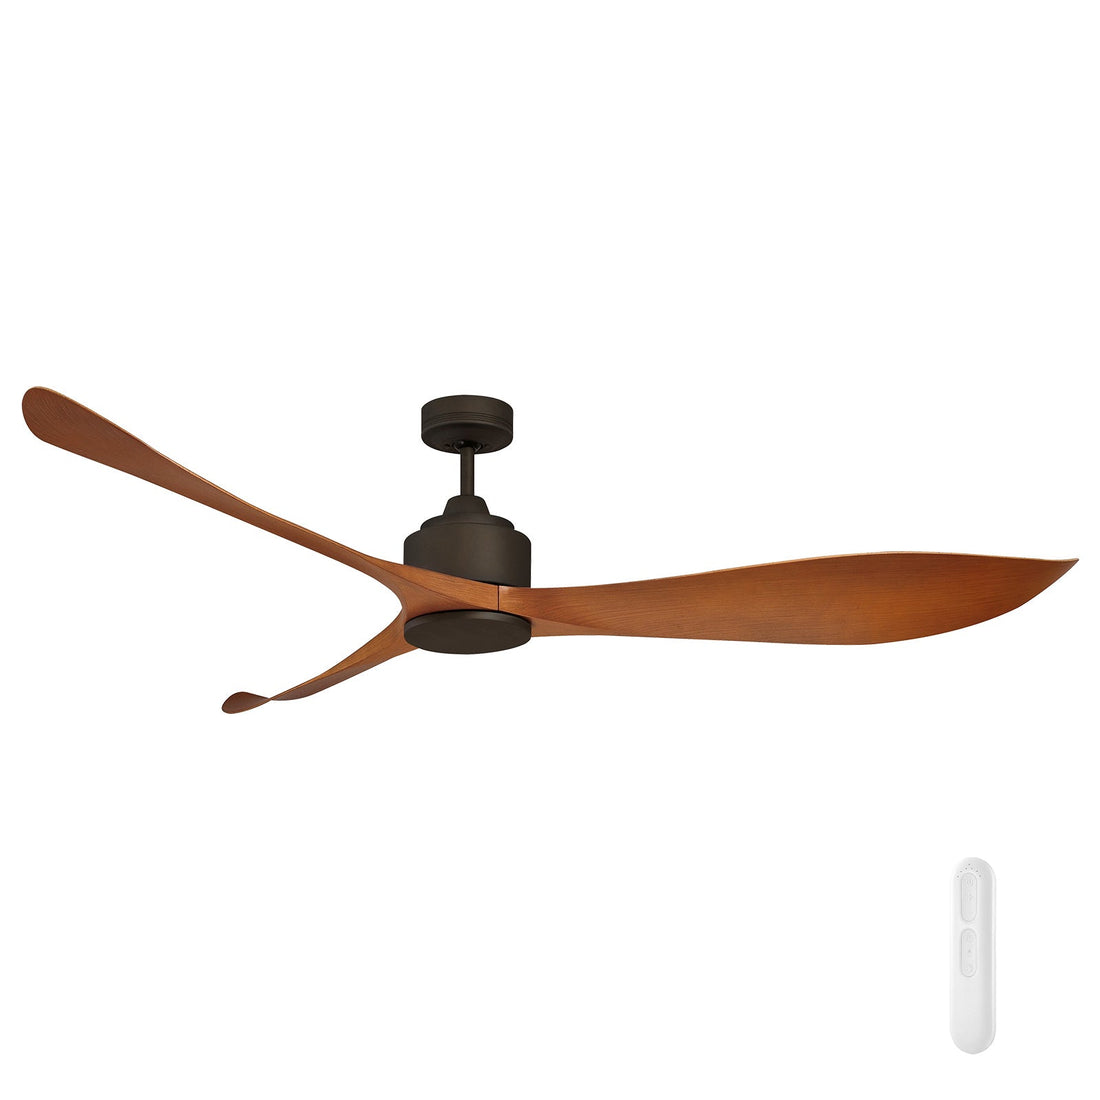 Eagle XL DC Ceiling Fan with Remote Mercator